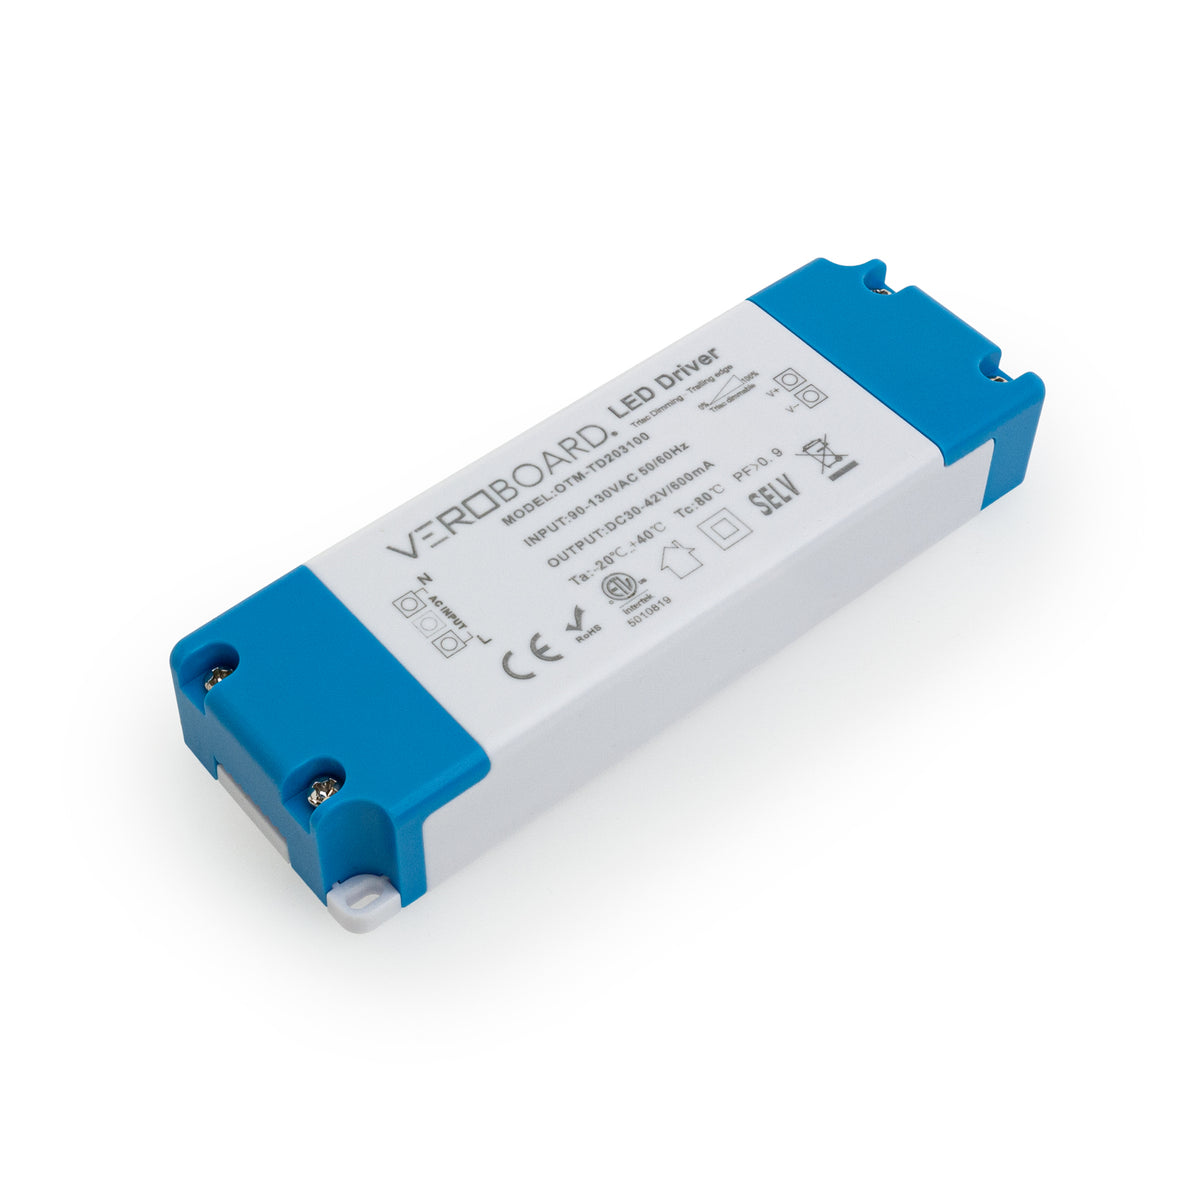 CCPSD series Constant Current LED Driver - DiodeDrive - TRIAC Dimmable -  25W - 700mA - 25-35 VDC